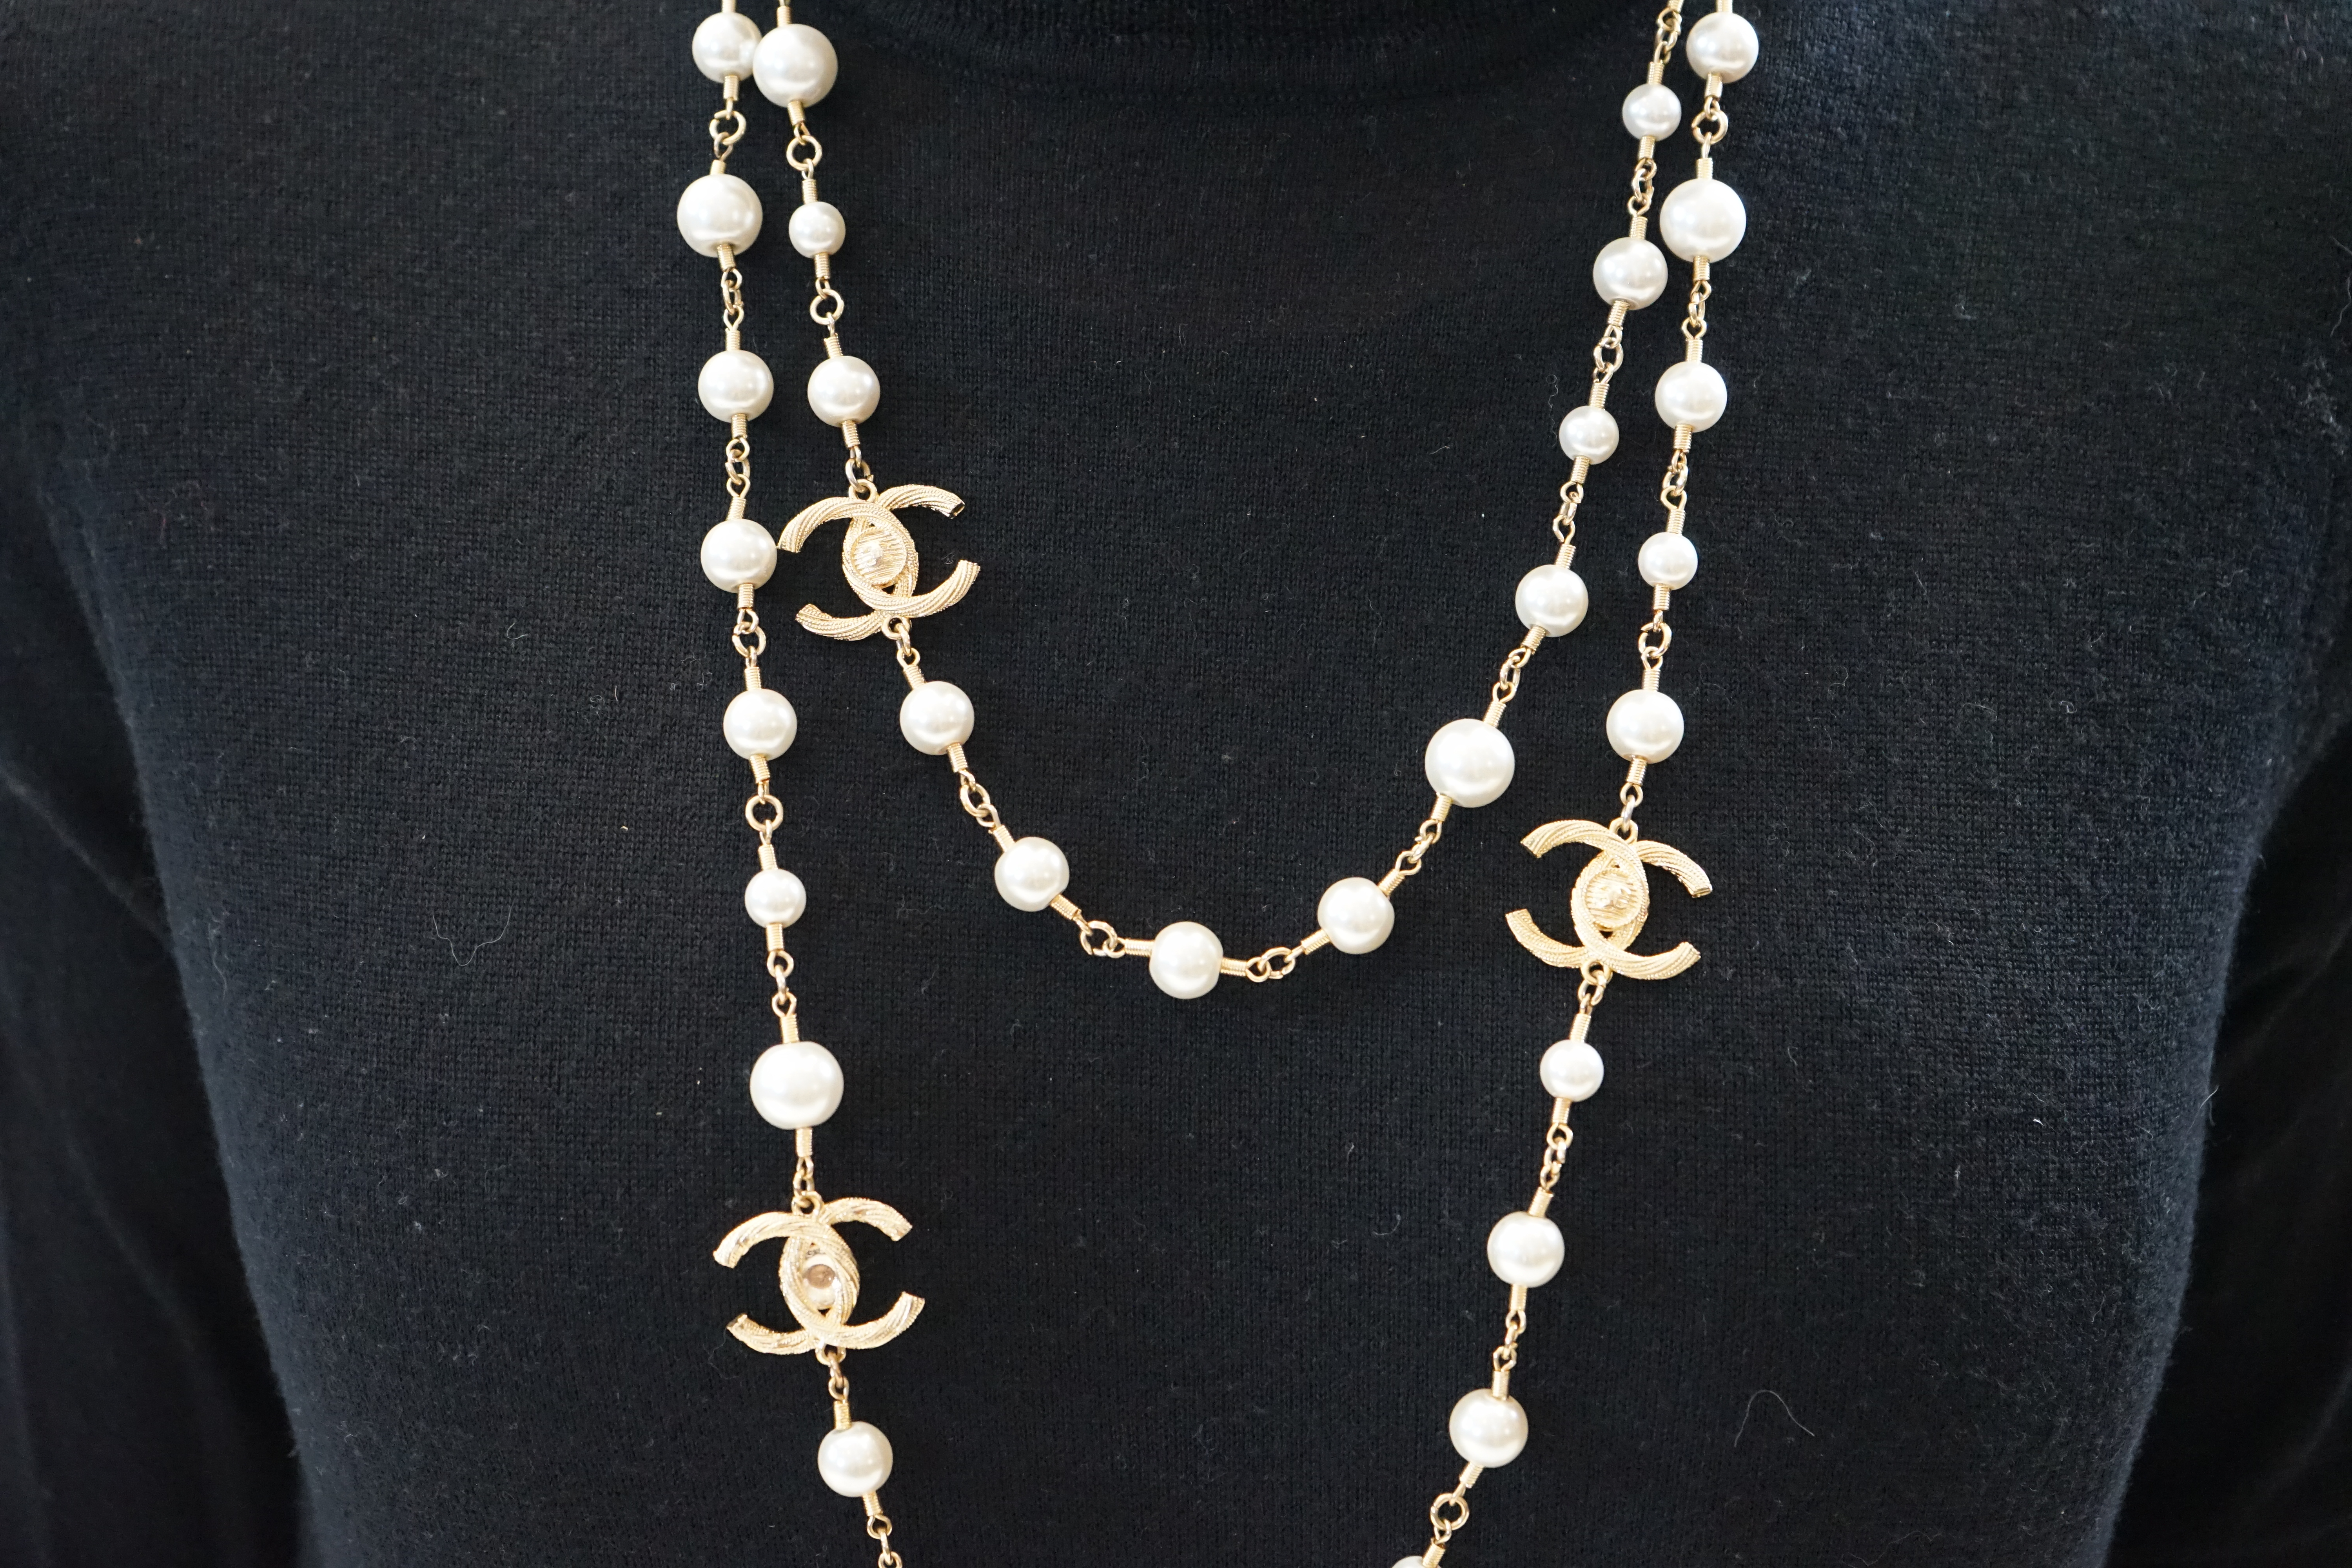 A Chanel gold plated 3 CC scatter pearl long necklace as seen in the film The Devil Wears Prada worn - Image 4 of 7